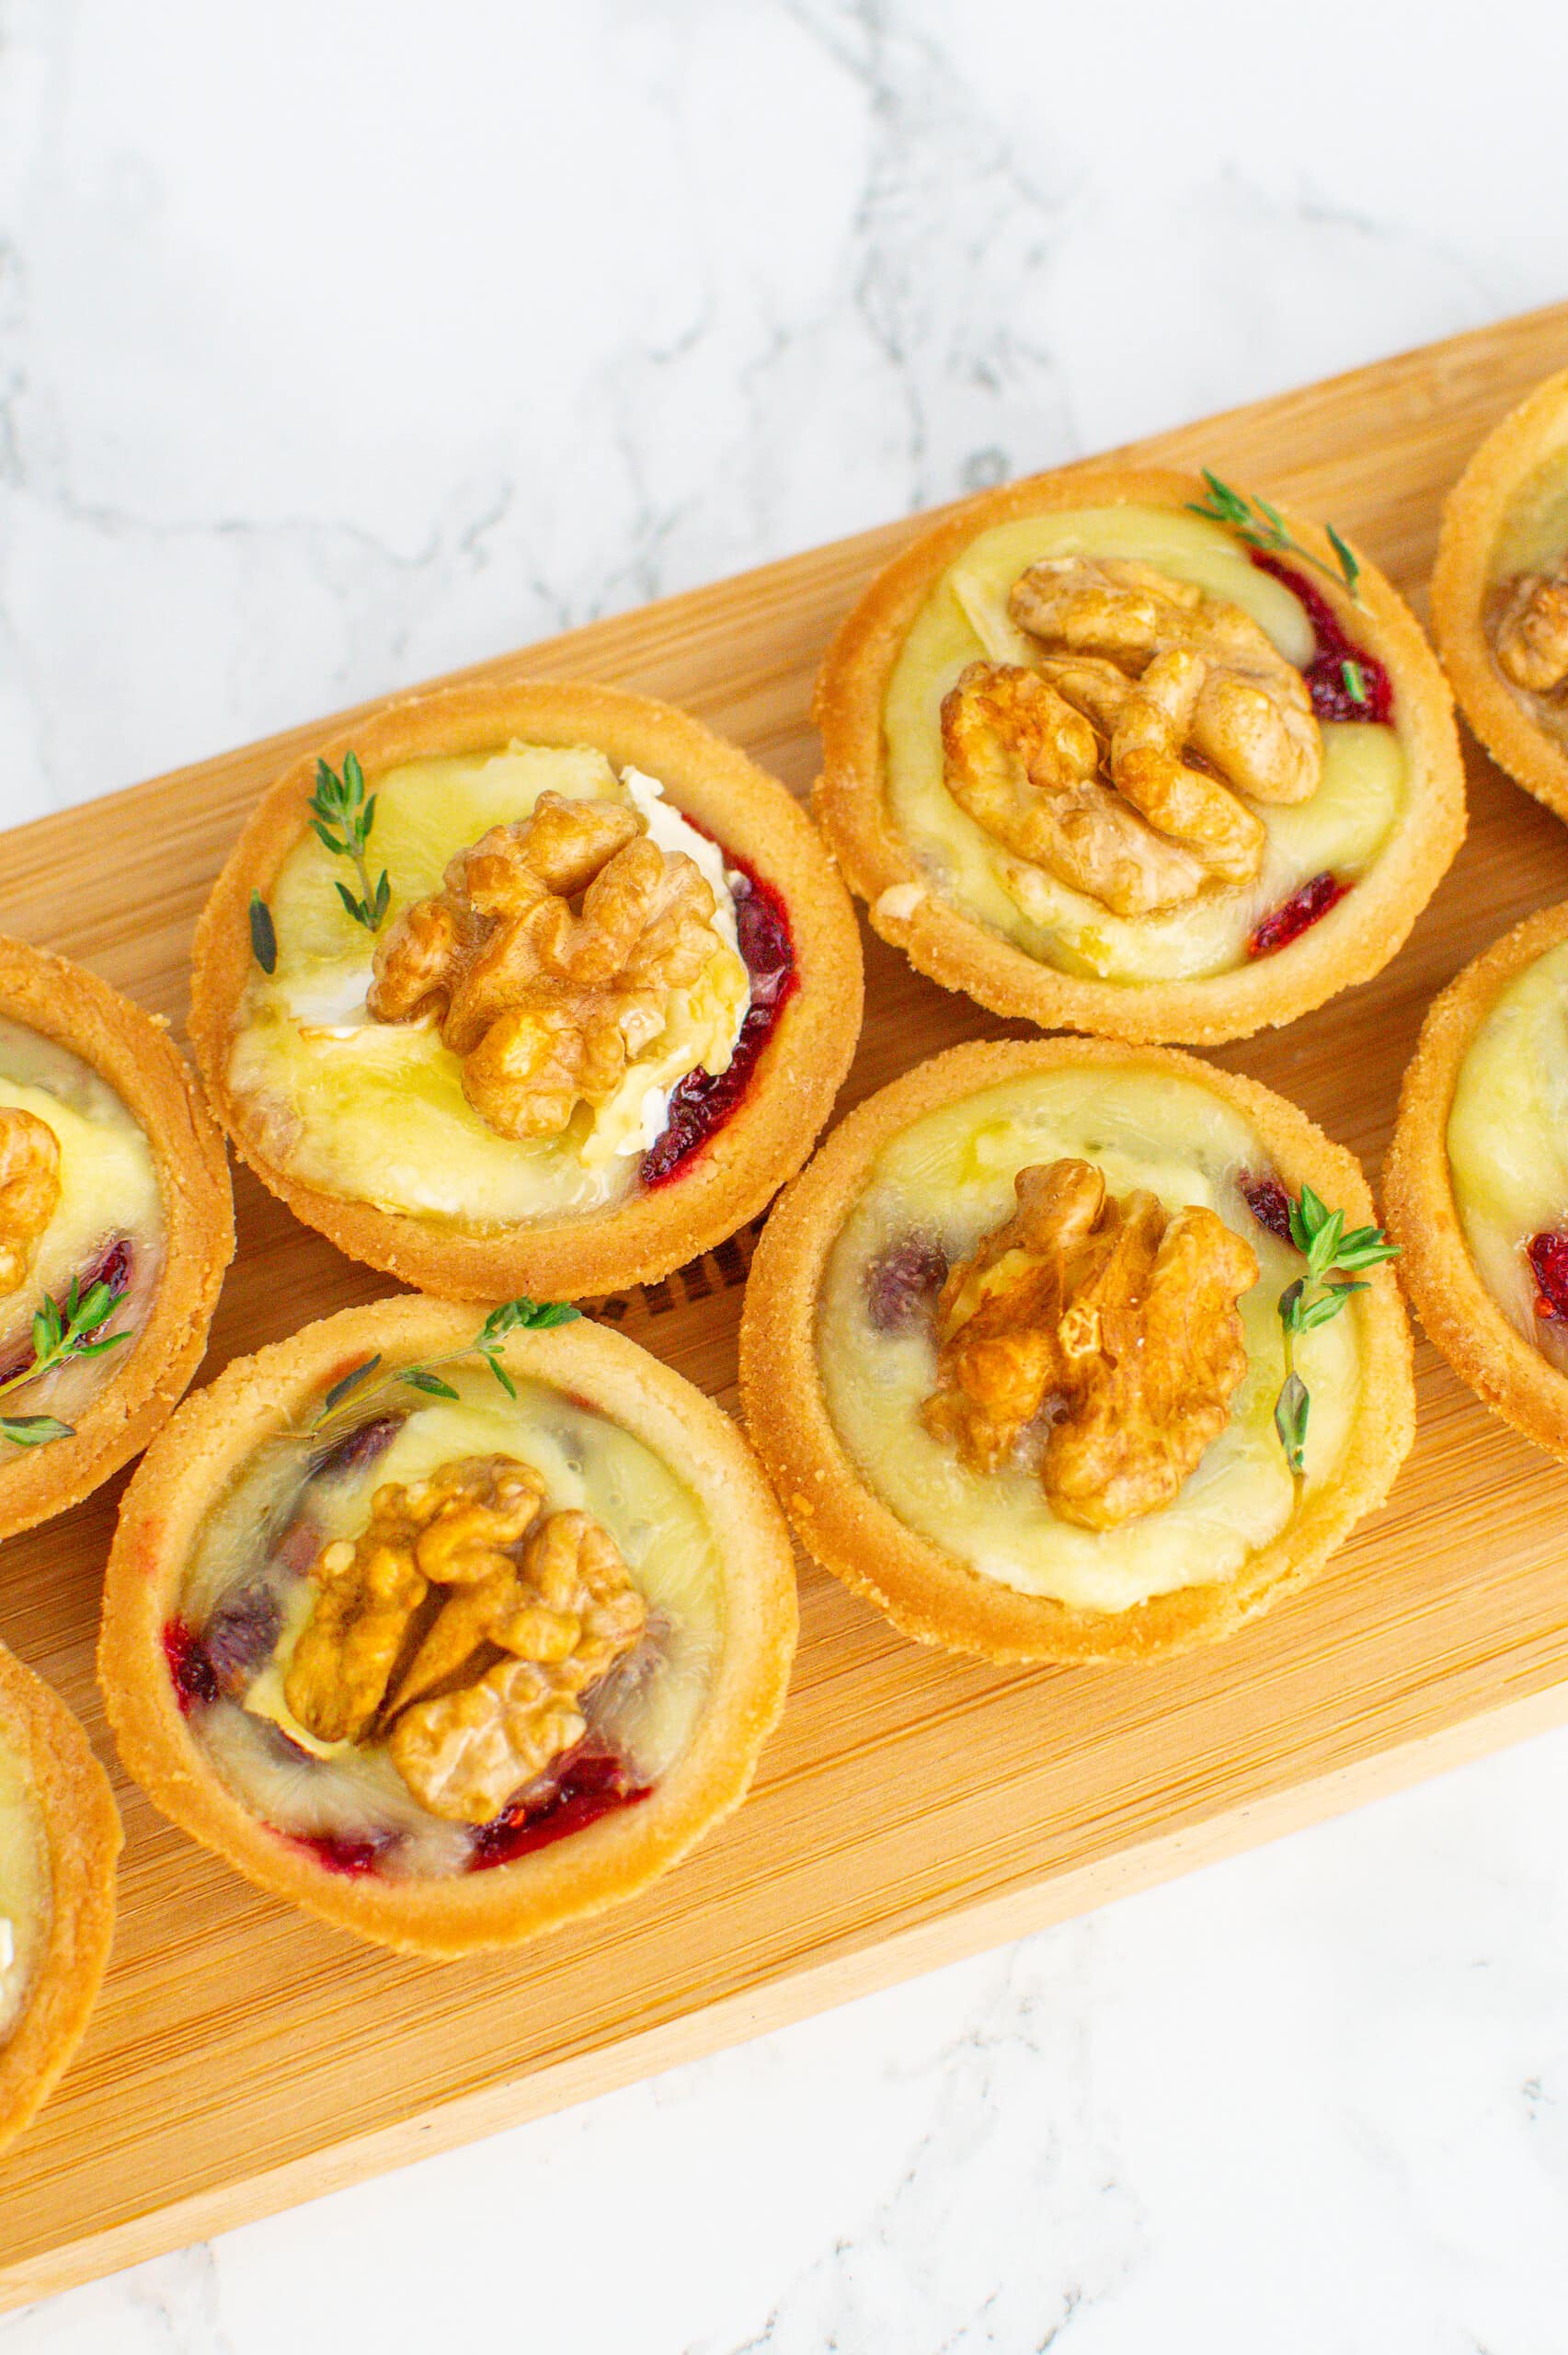 Wooden serving board with tartlets with brie cheese, walnuts and jam.